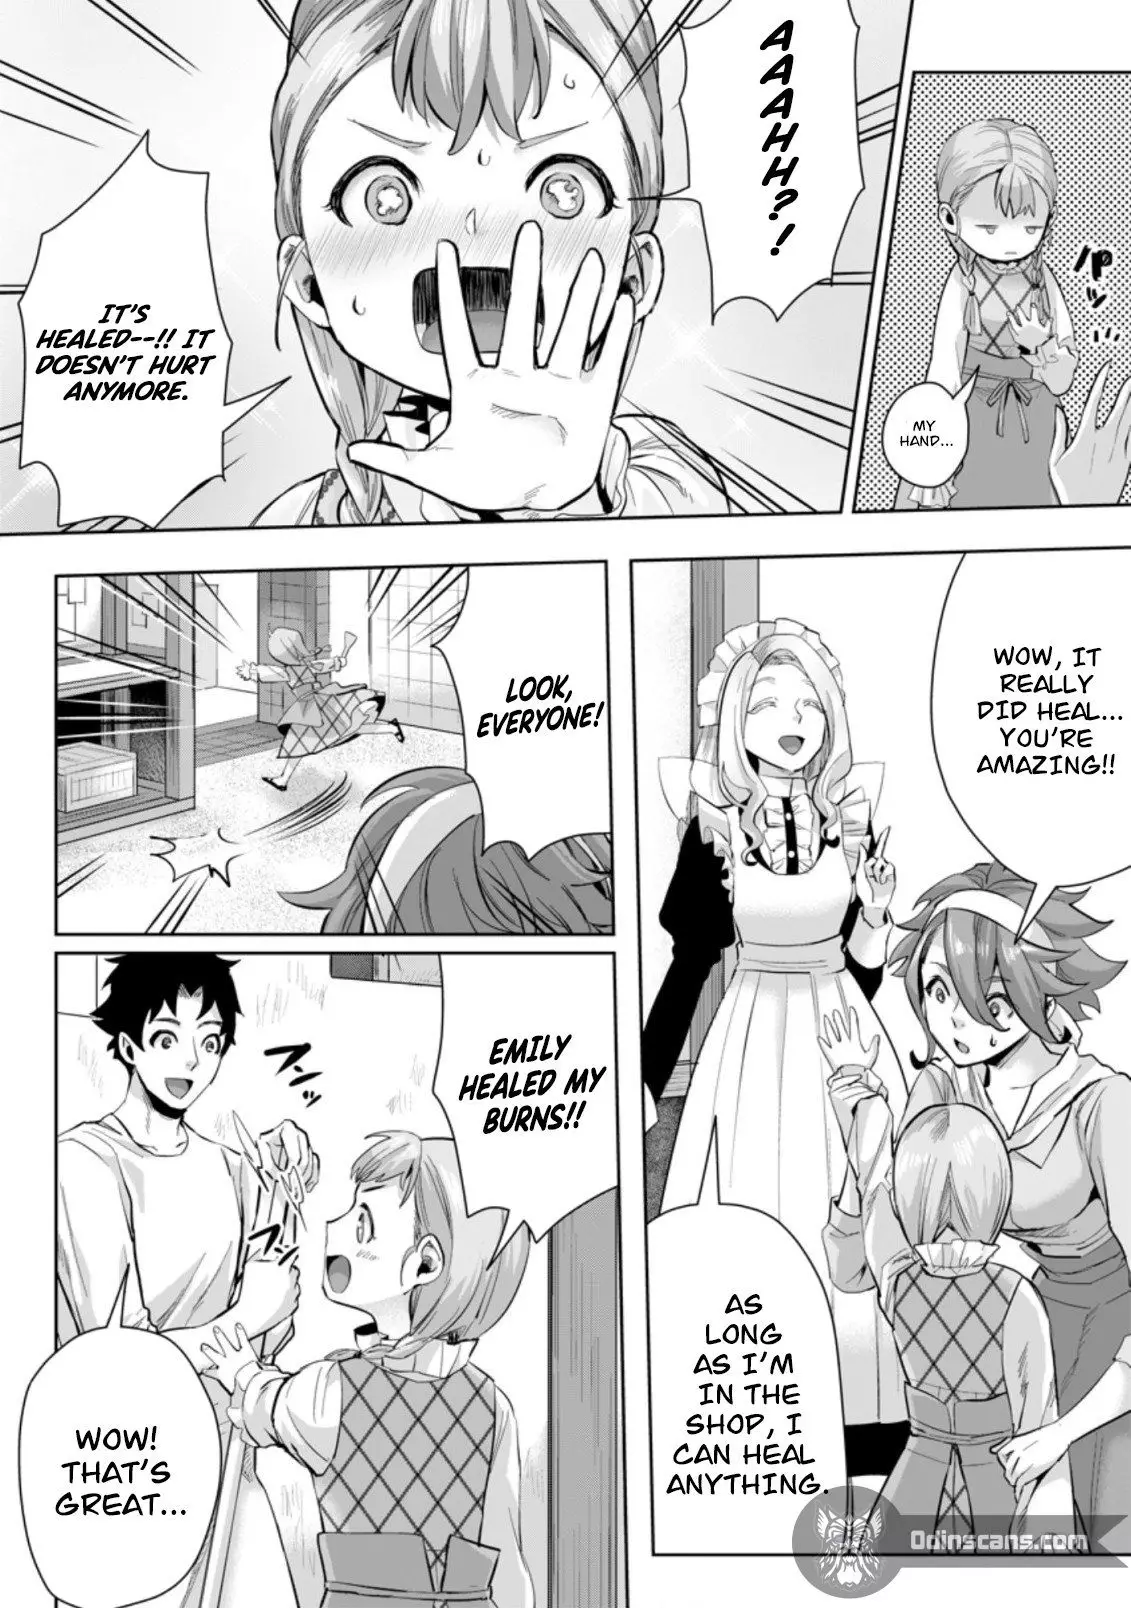 It Seems That I Was Reincarnated Into The World Of A School Otome Game, But I Was A Background Male Student With Cheats. - 10.2 page 3-4aa6c9f8